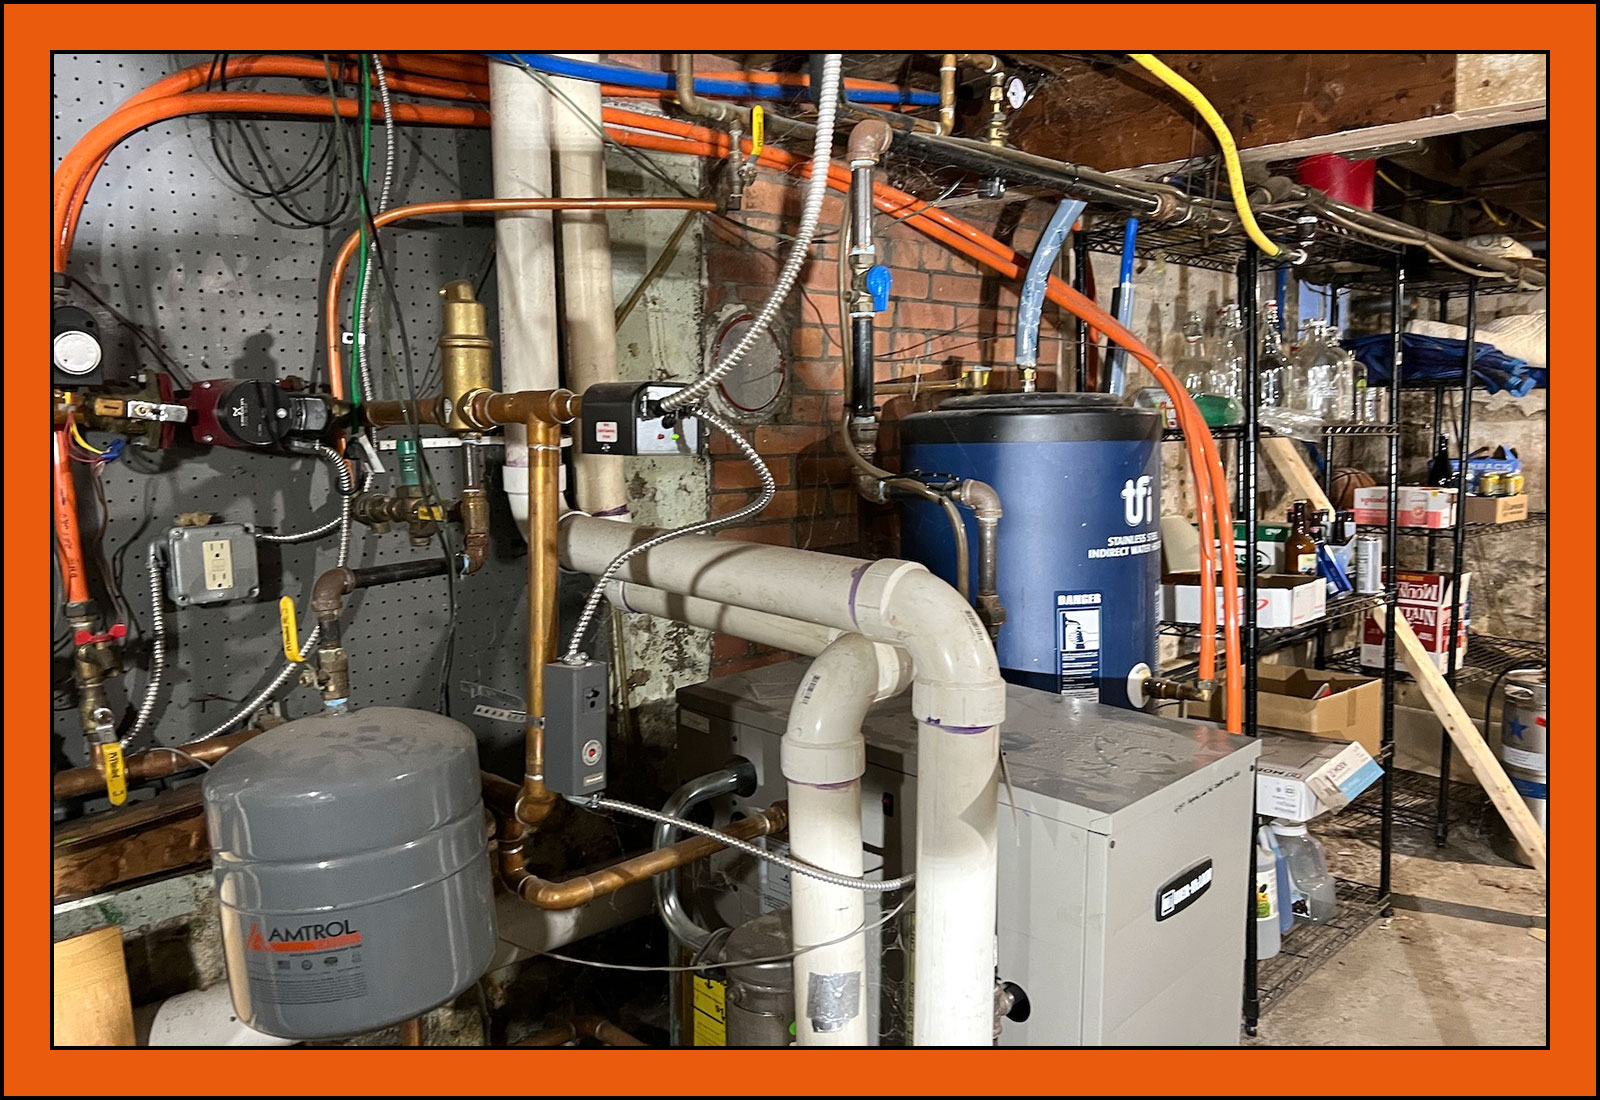 The gas boiler and old water heater in Tik's basement